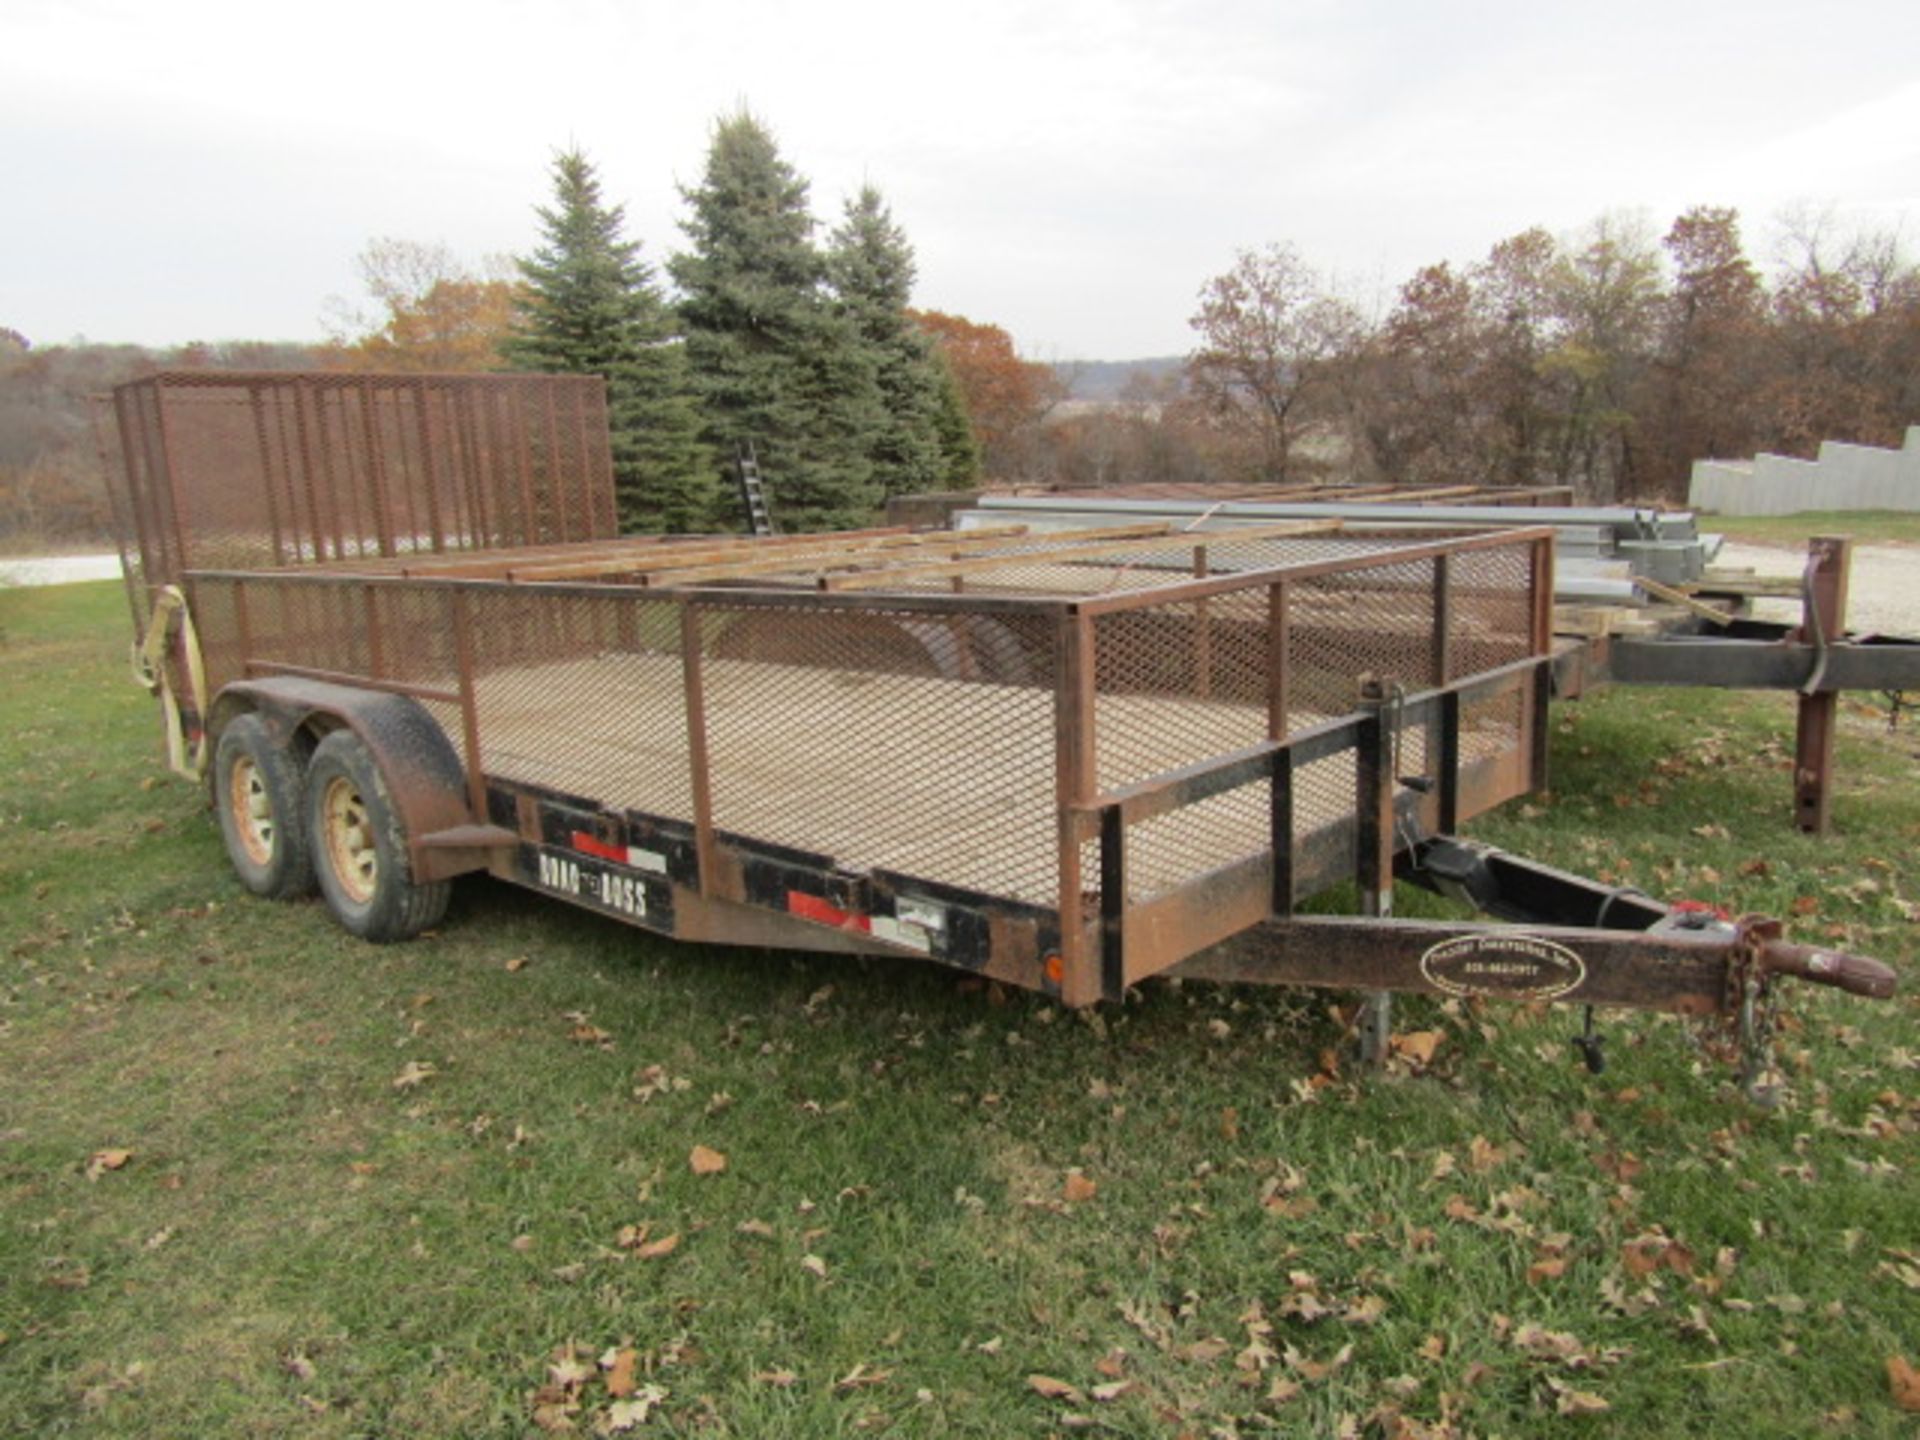 2006 Road Boss Tandem Axle Trailer, Wood Deck, Located in Winterset, IA - Image 2 of 6